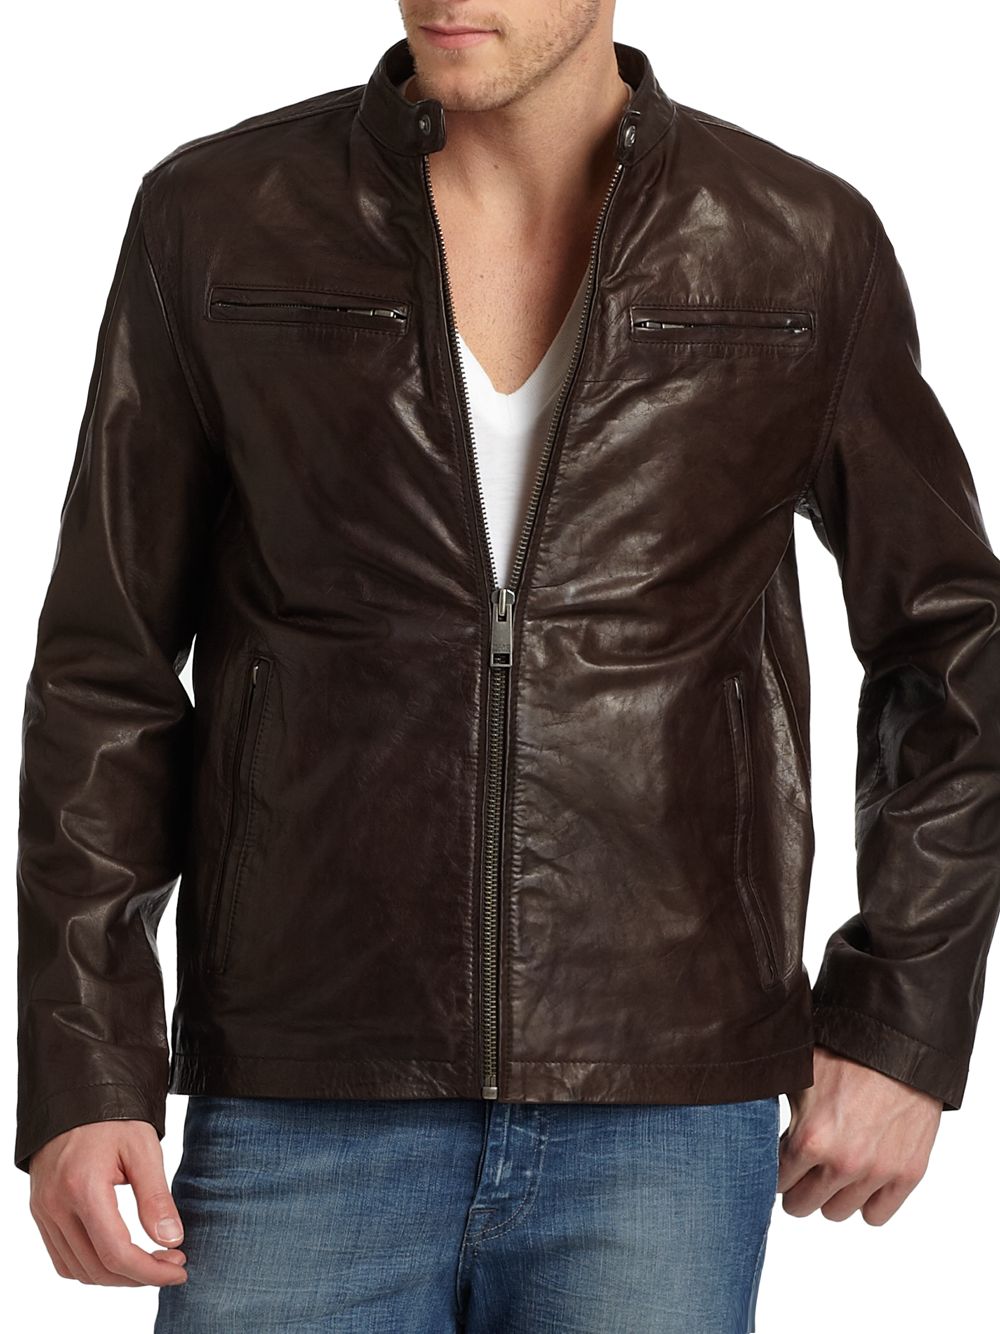 Marc New York Vernon Leather Jacket in Brown for Men - Lyst